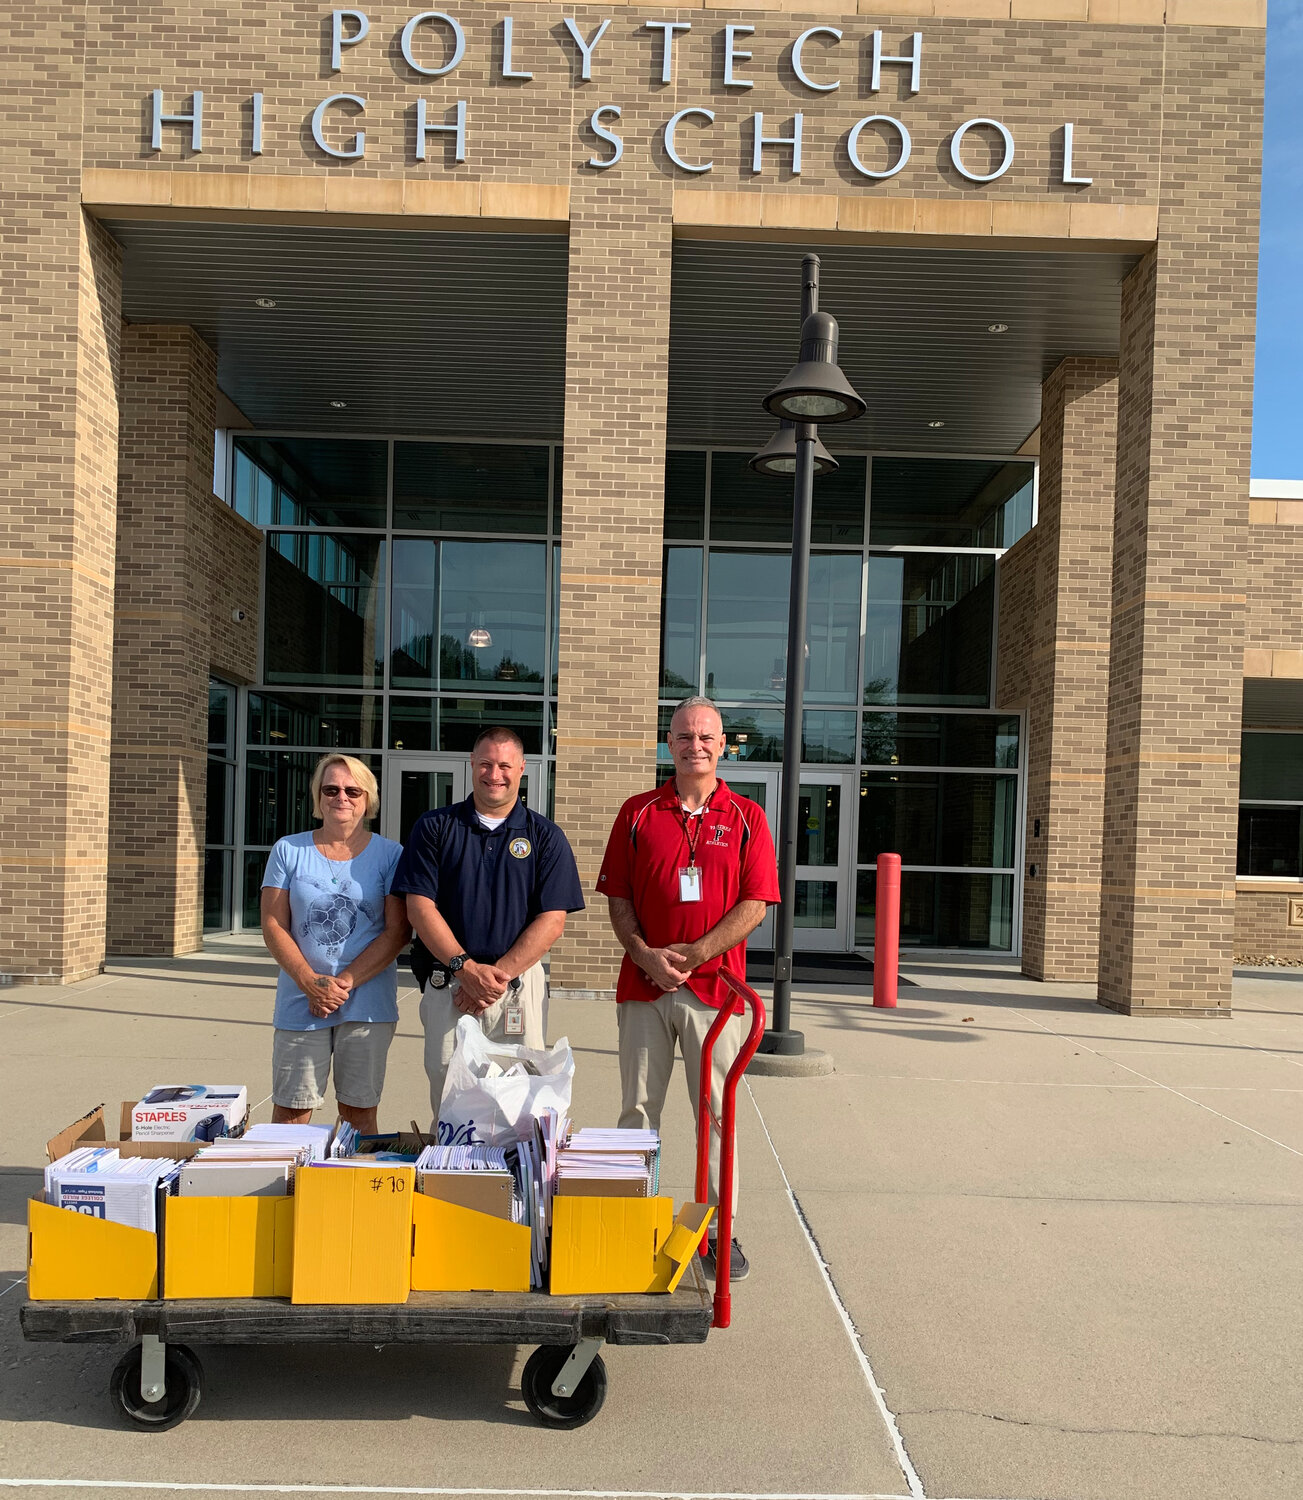 From left, Caring Hearts, Helping Hands director Nancy McCoury distributes school supplies to Polytech High School school resource officer Detective Nick Miller and custodian Drew Wooten.